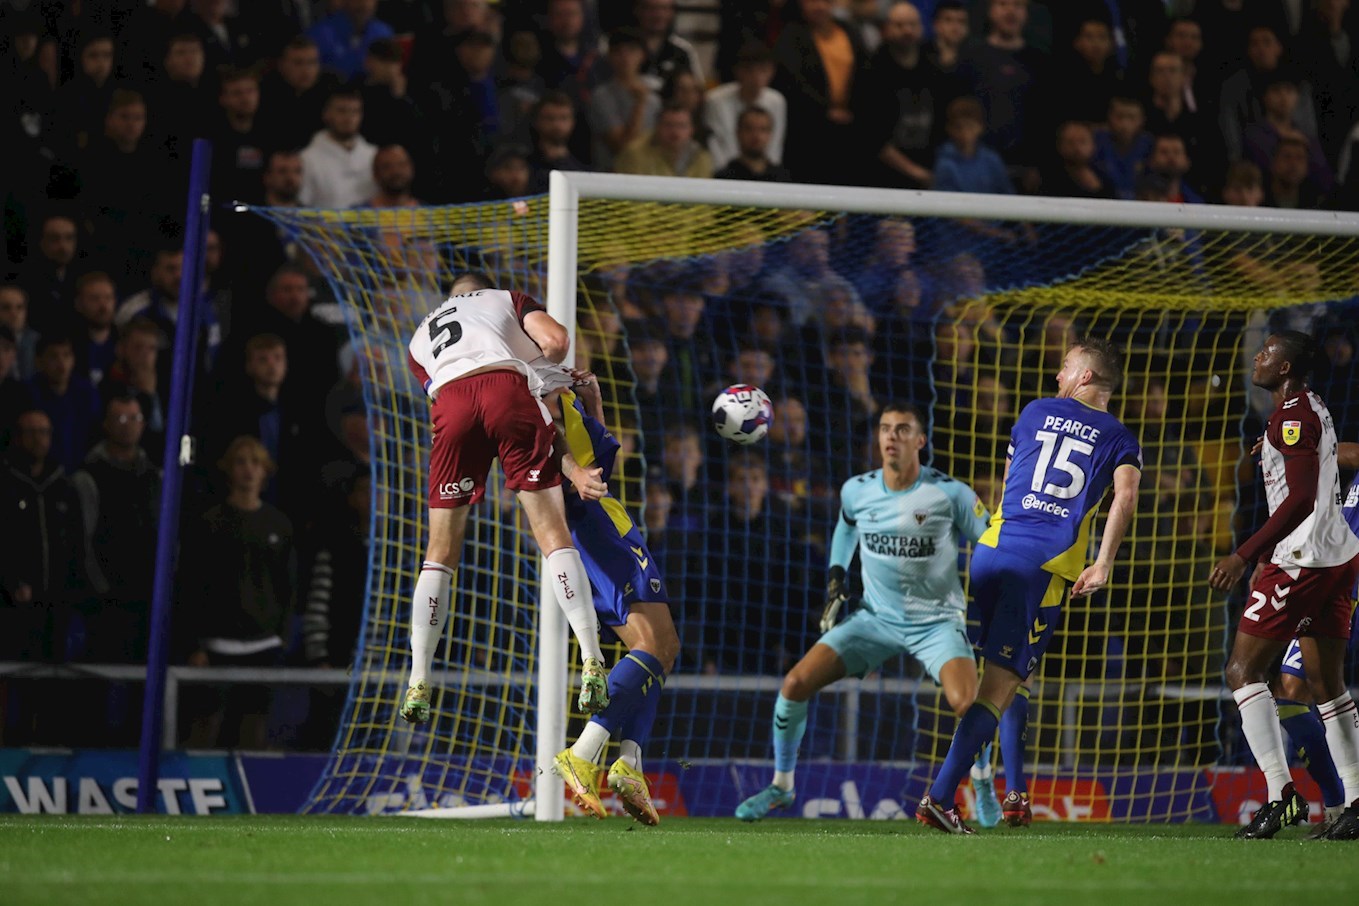 WATCH THE AFC WIMBLEDON GAME LIVE ON IFOLLOW - News - Northampton Town